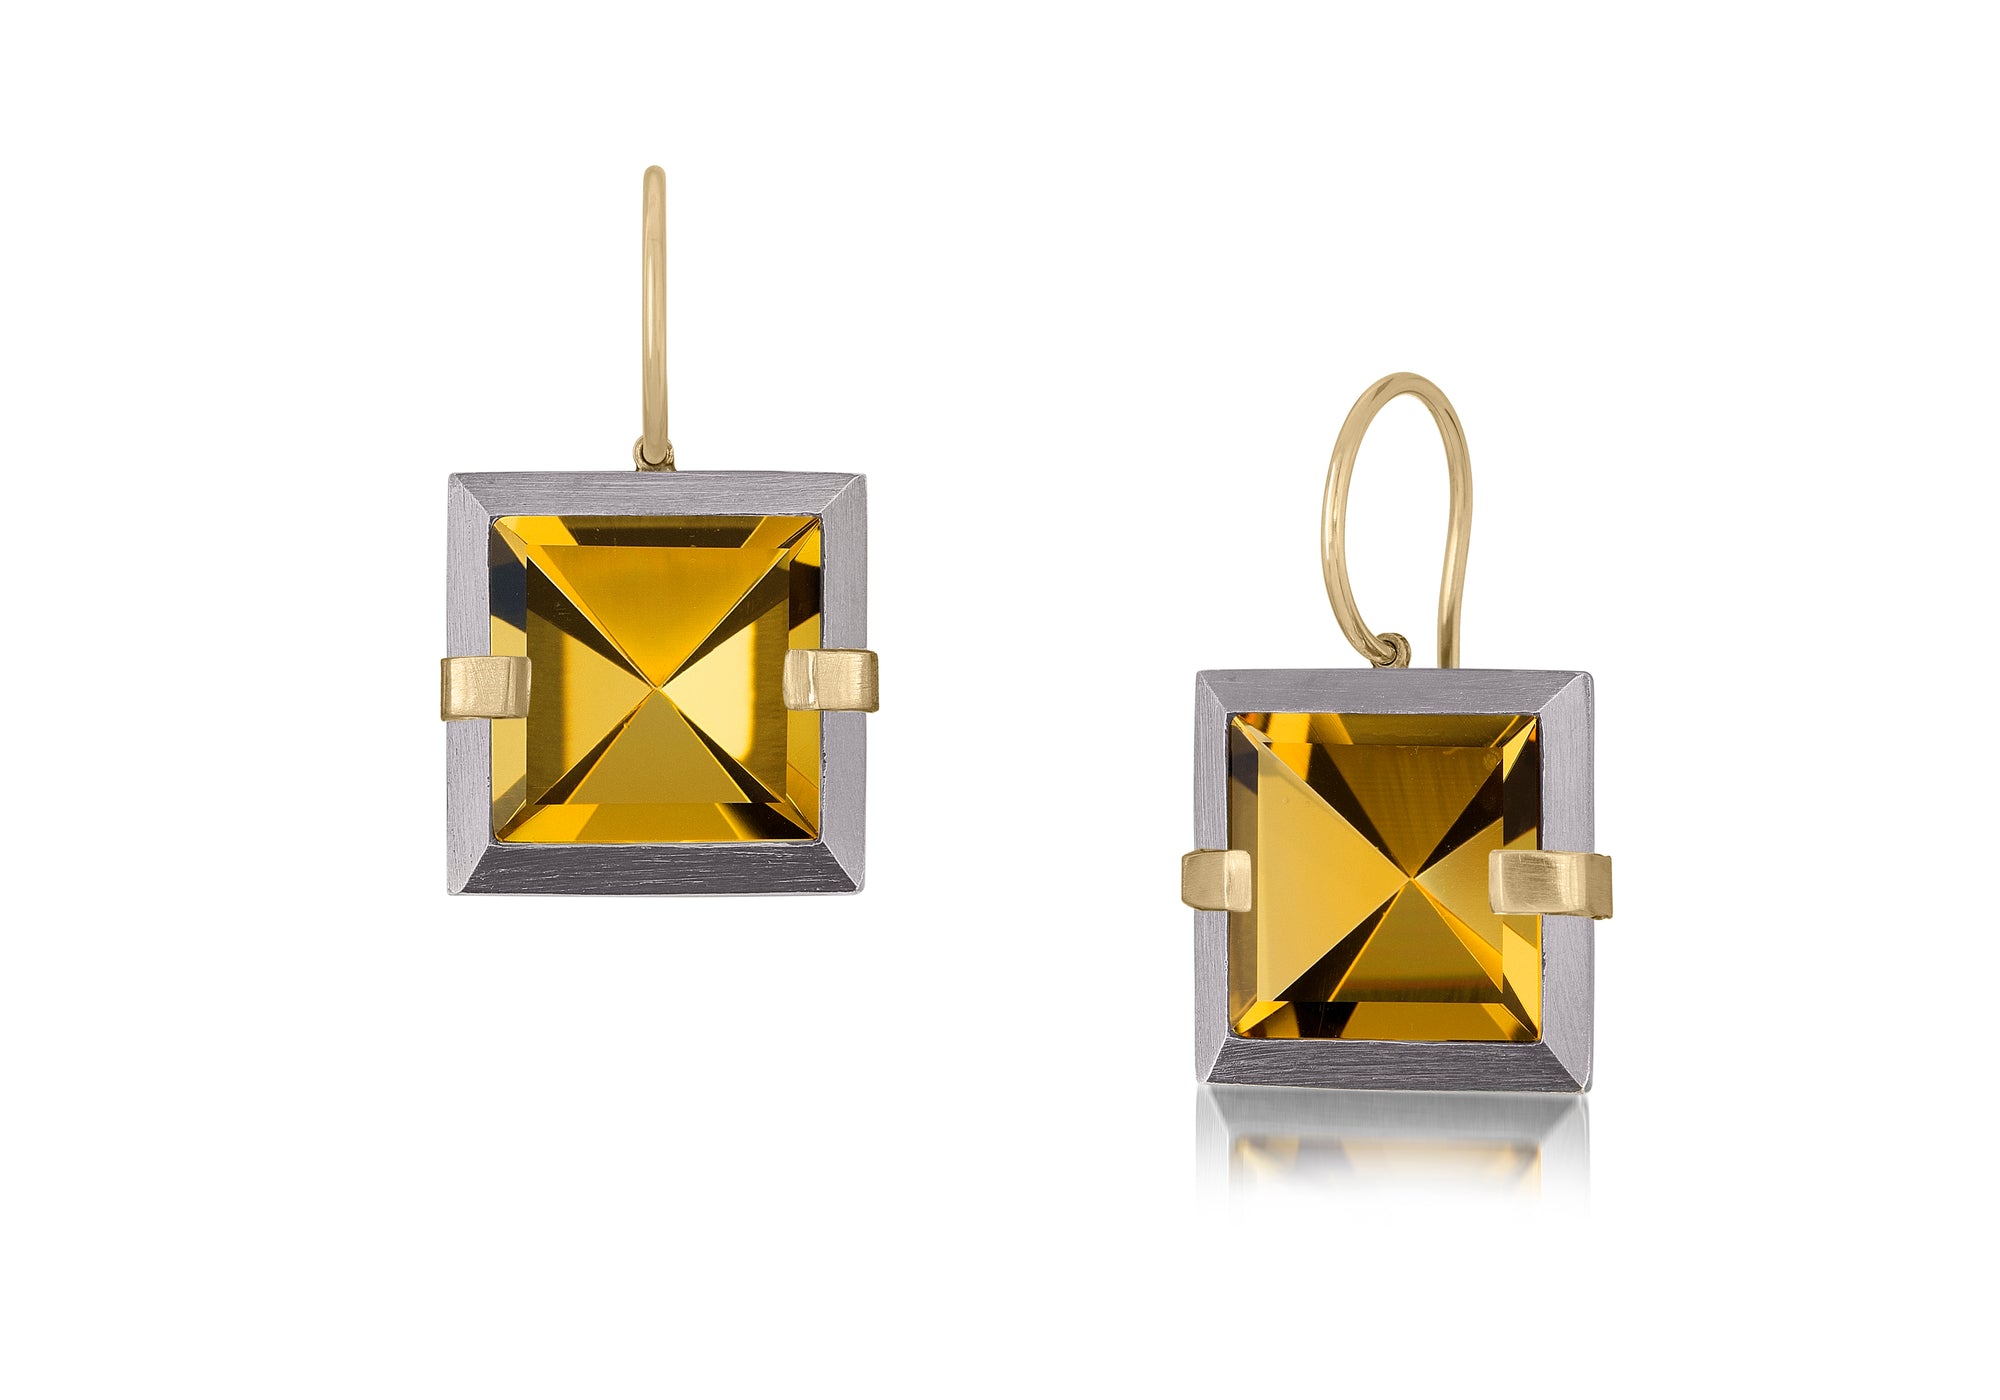 This small style Facets drop earring is natural gemstone set in oxidized sterling and 18k gold. Crisp and sparkling faceted squares of natural stone are accented with 18k gold prongs and hang from 18k gold ear wires. 7.46+ tcw.